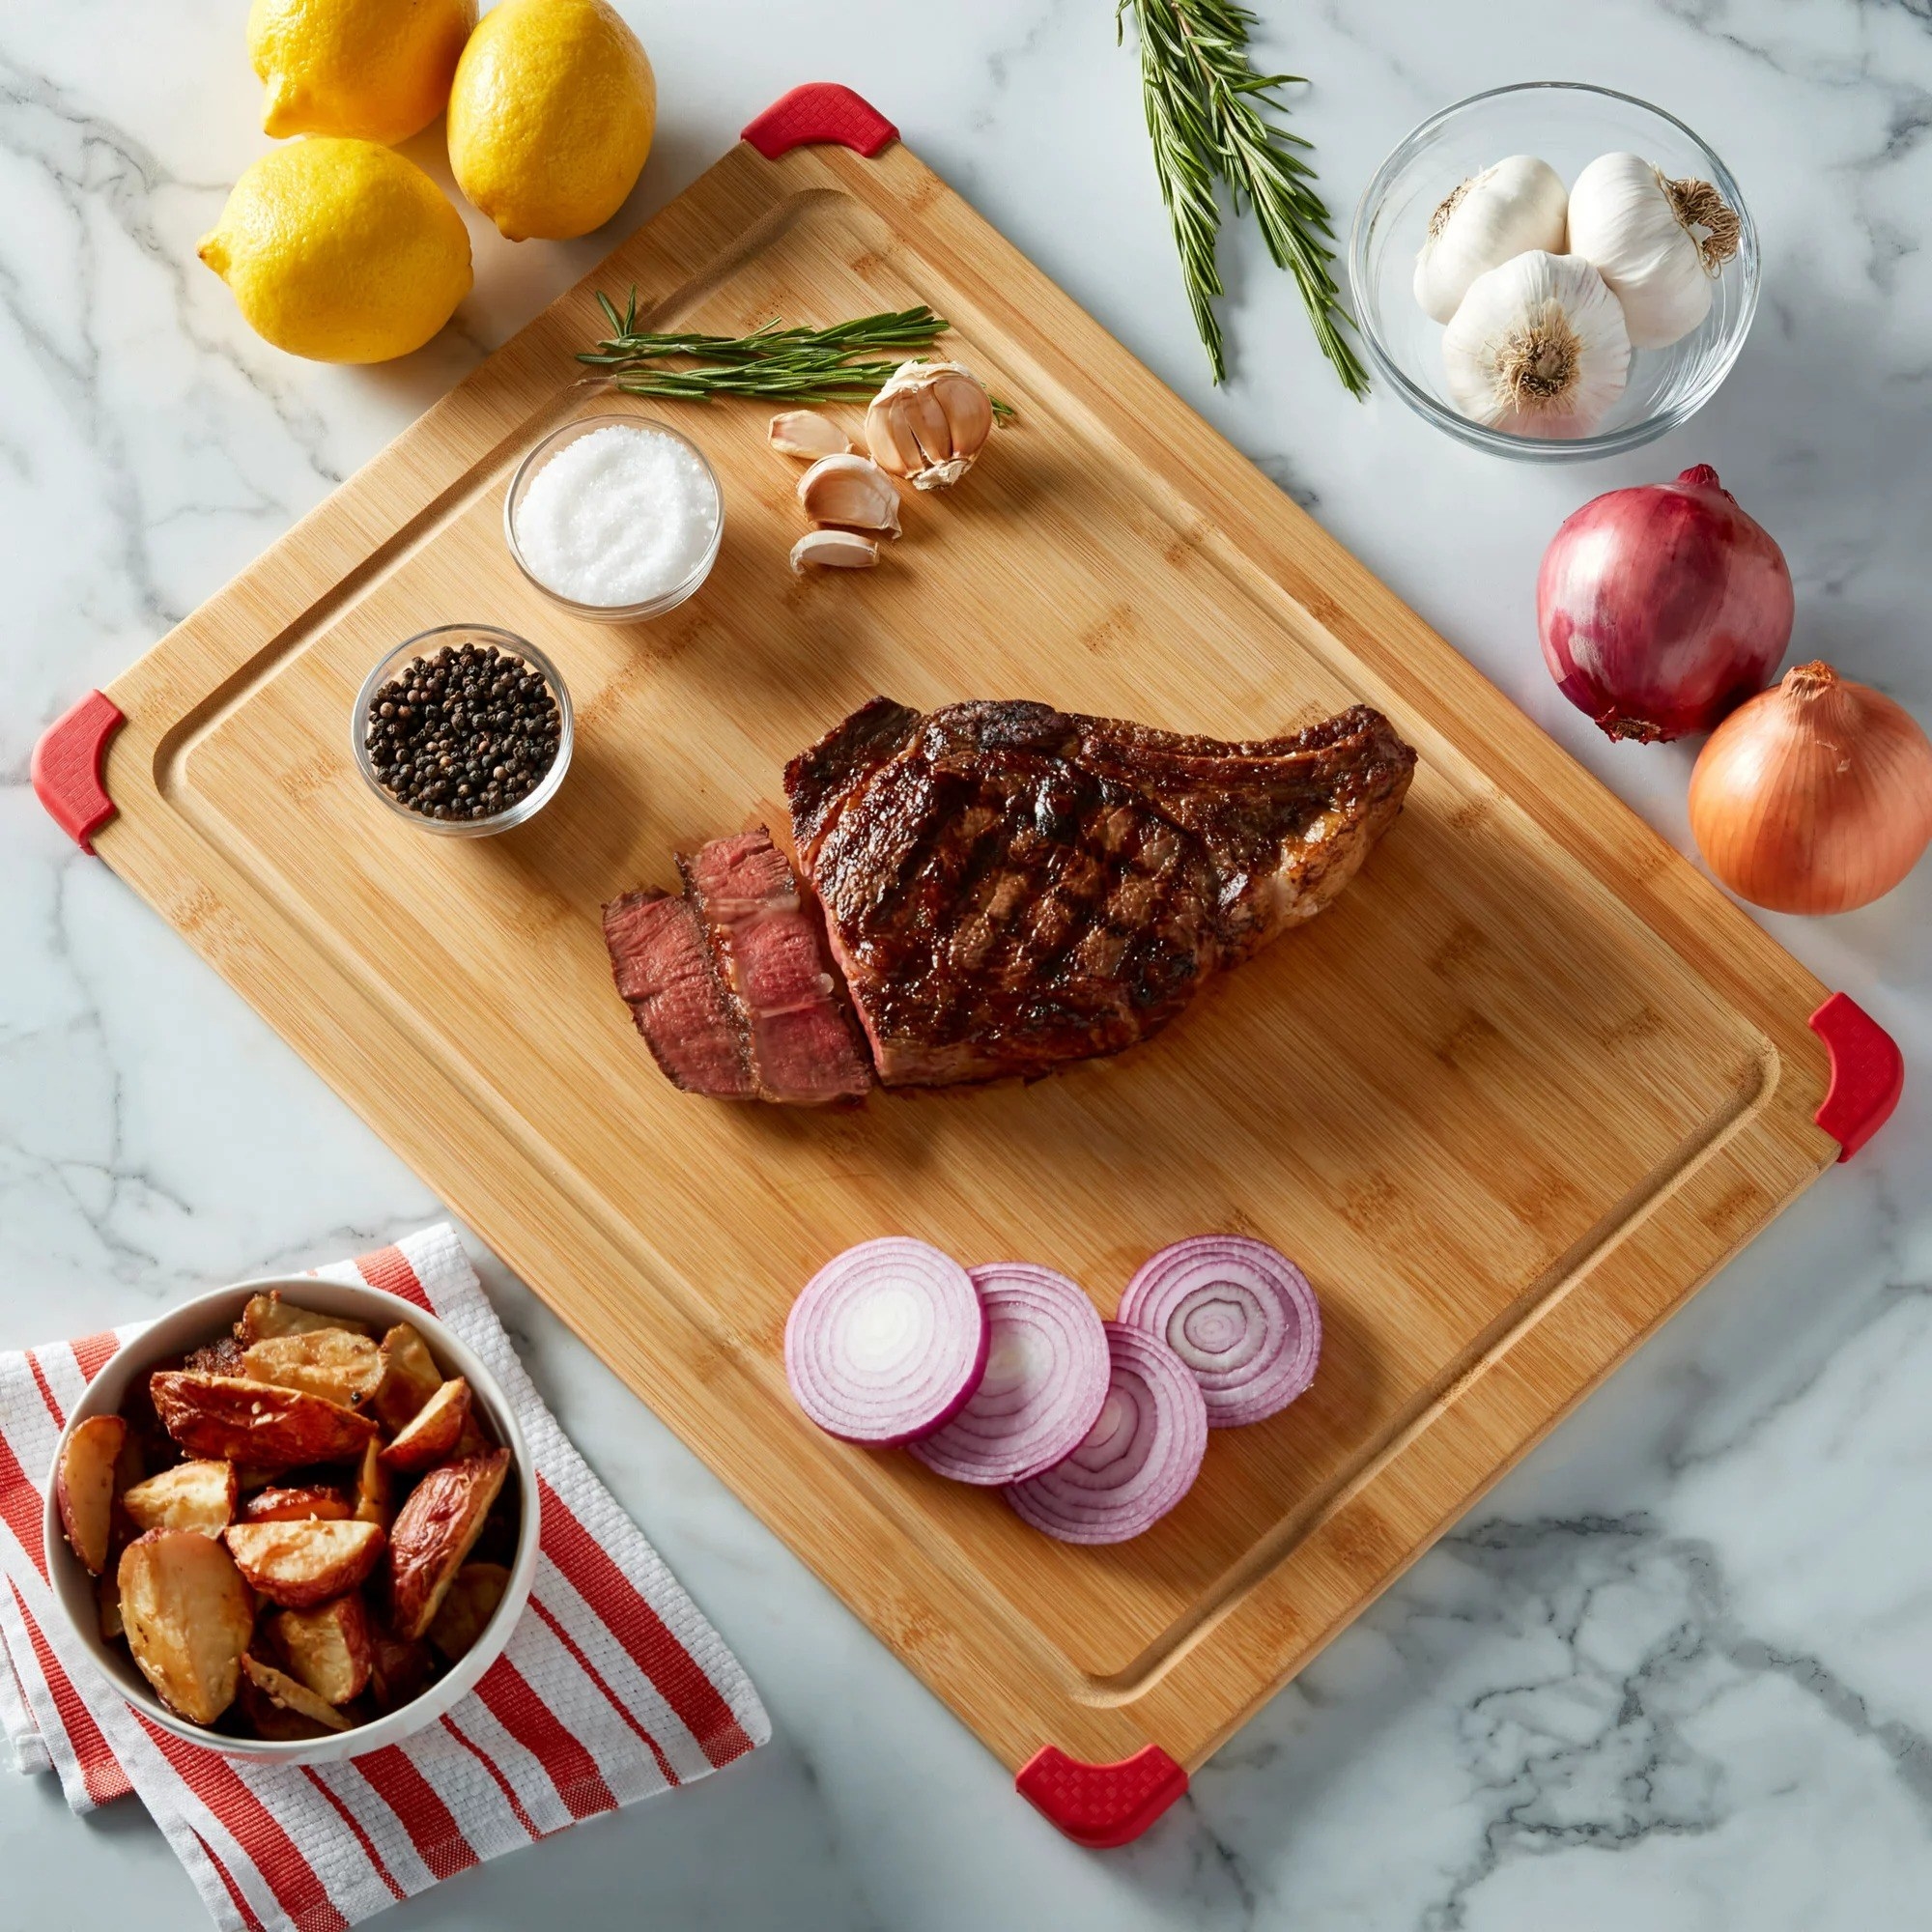 A steak resting on the wooden cutting board on top of a kitchen counter